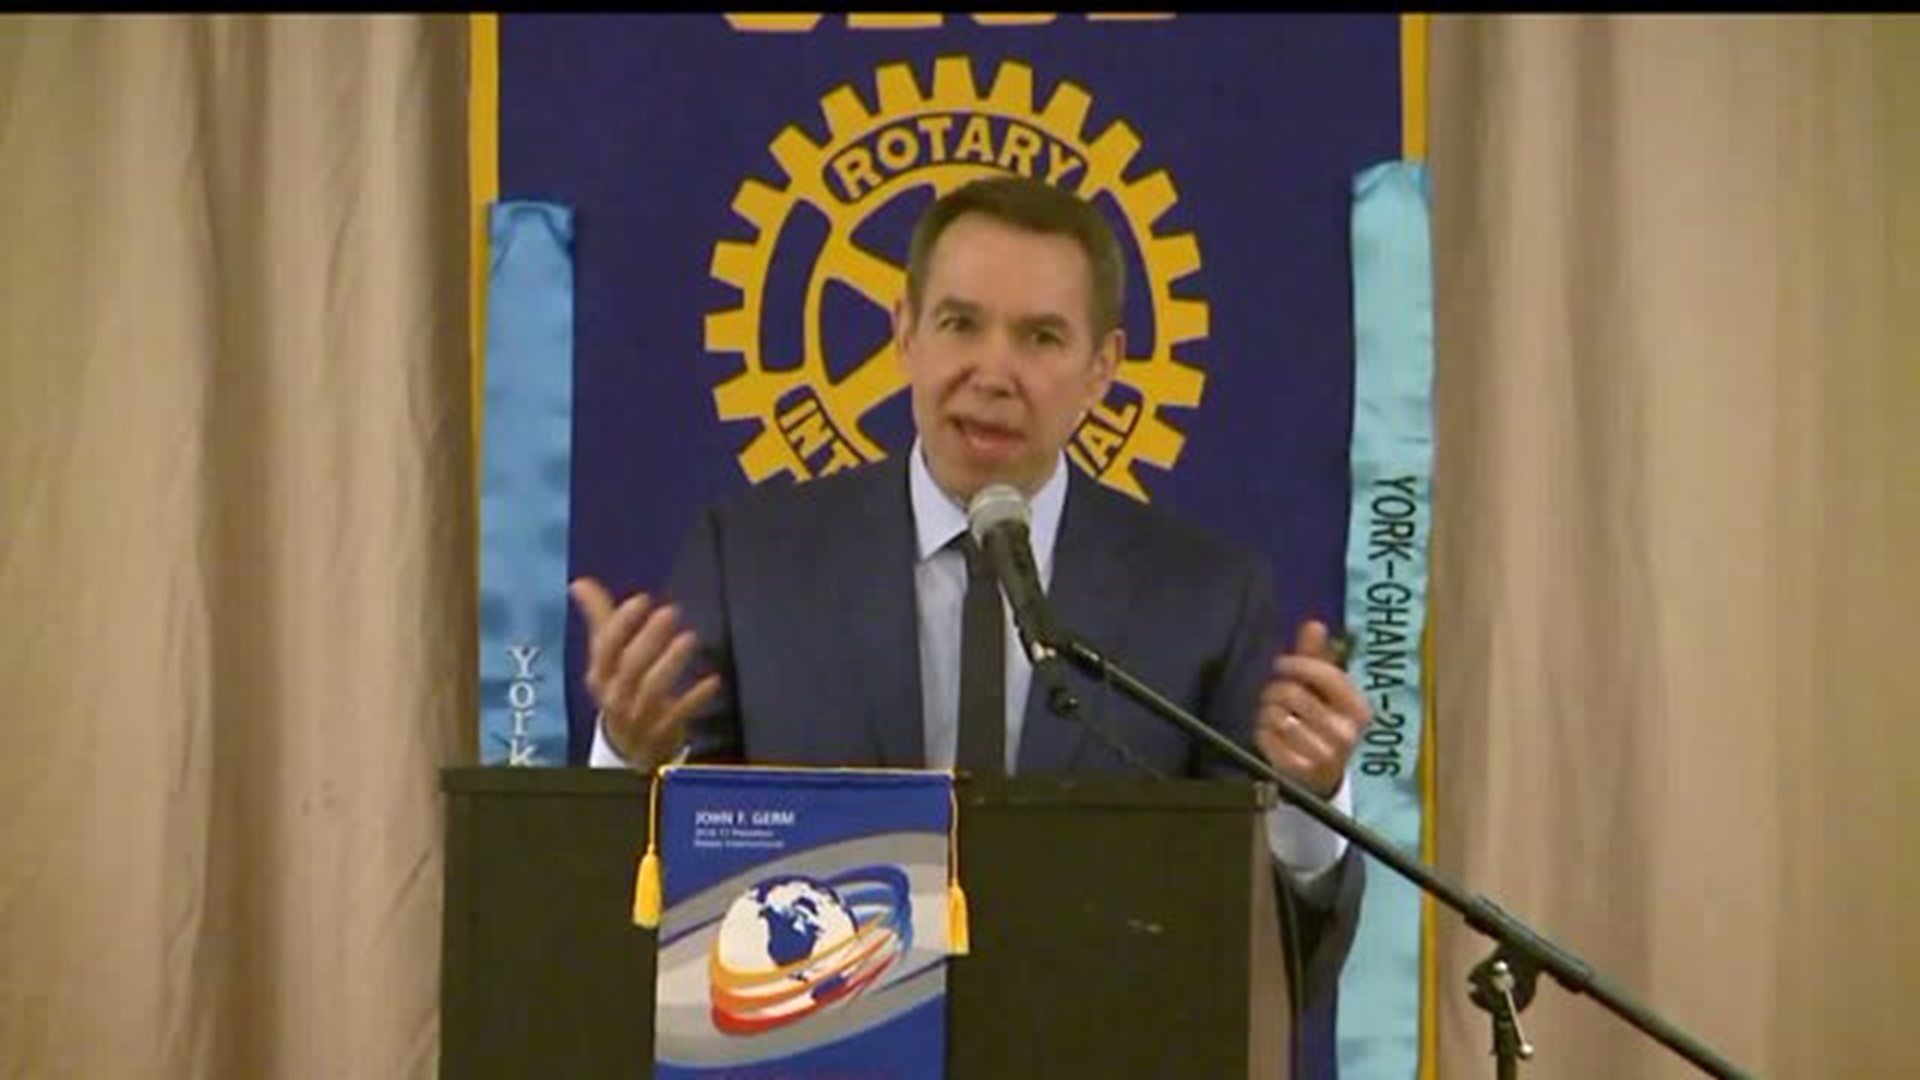 Artist with local roots speaks at Rotary of York